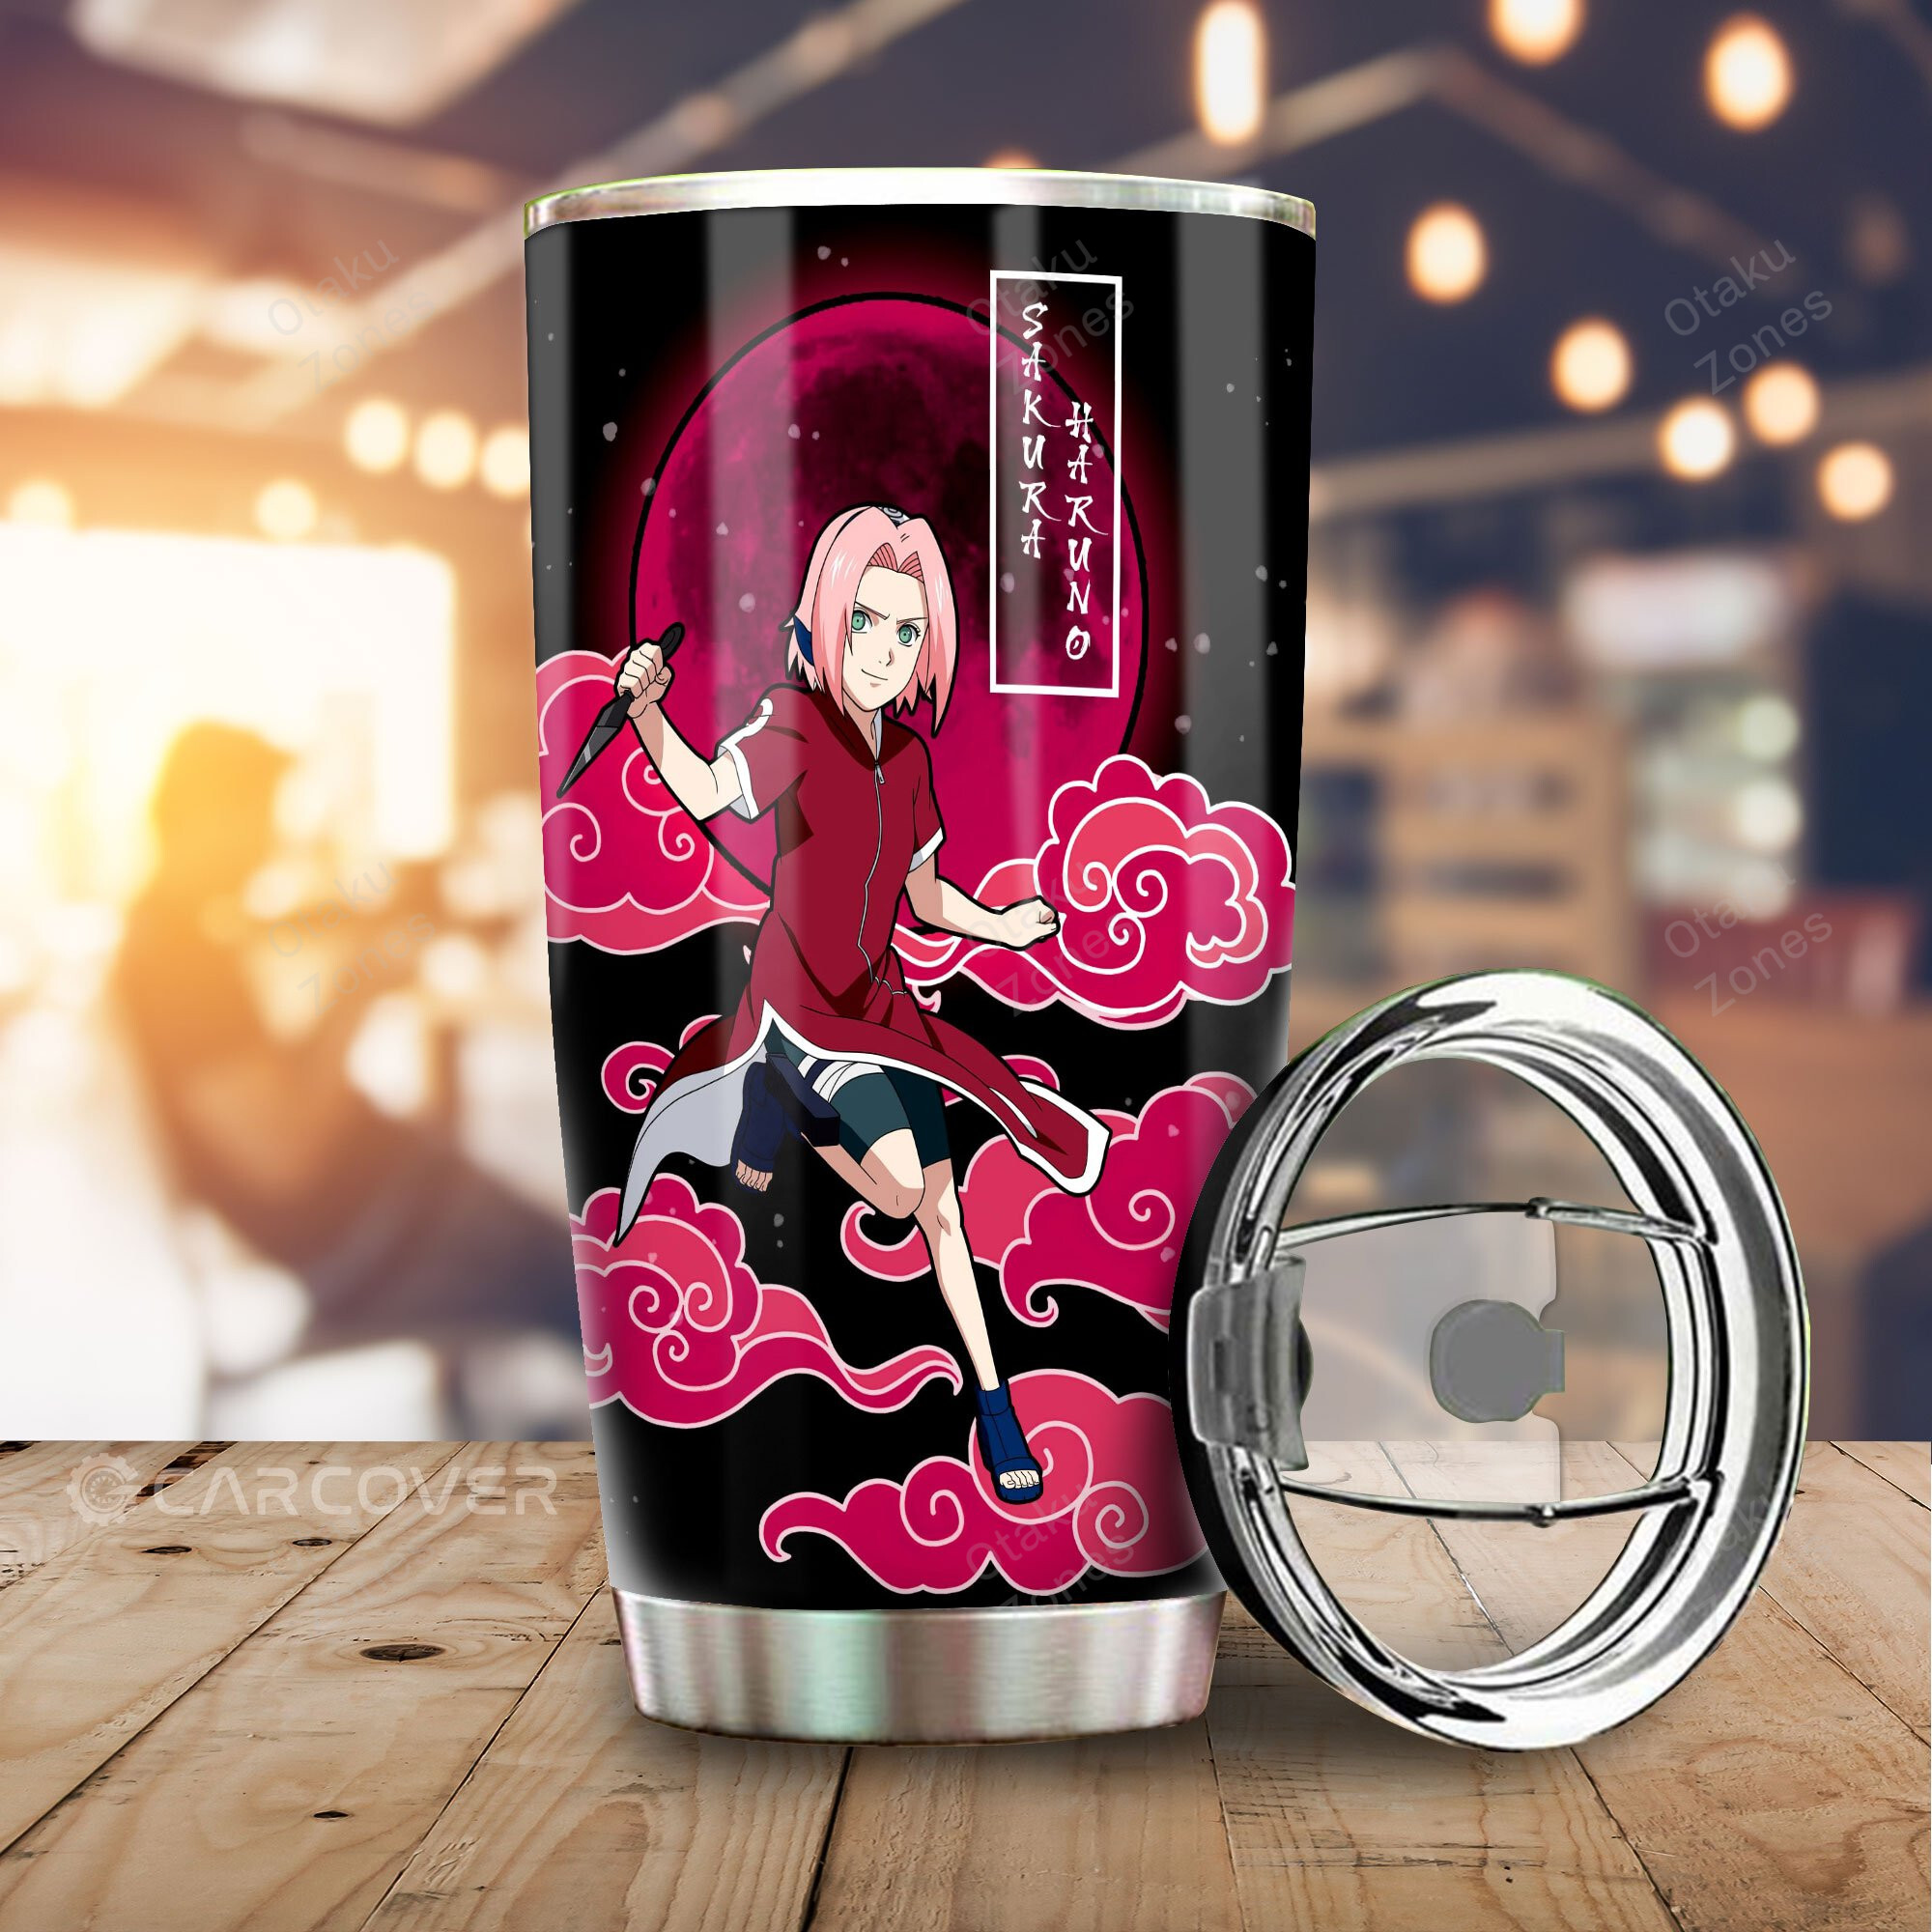 Show off your favorite Anime character in style with these products 9